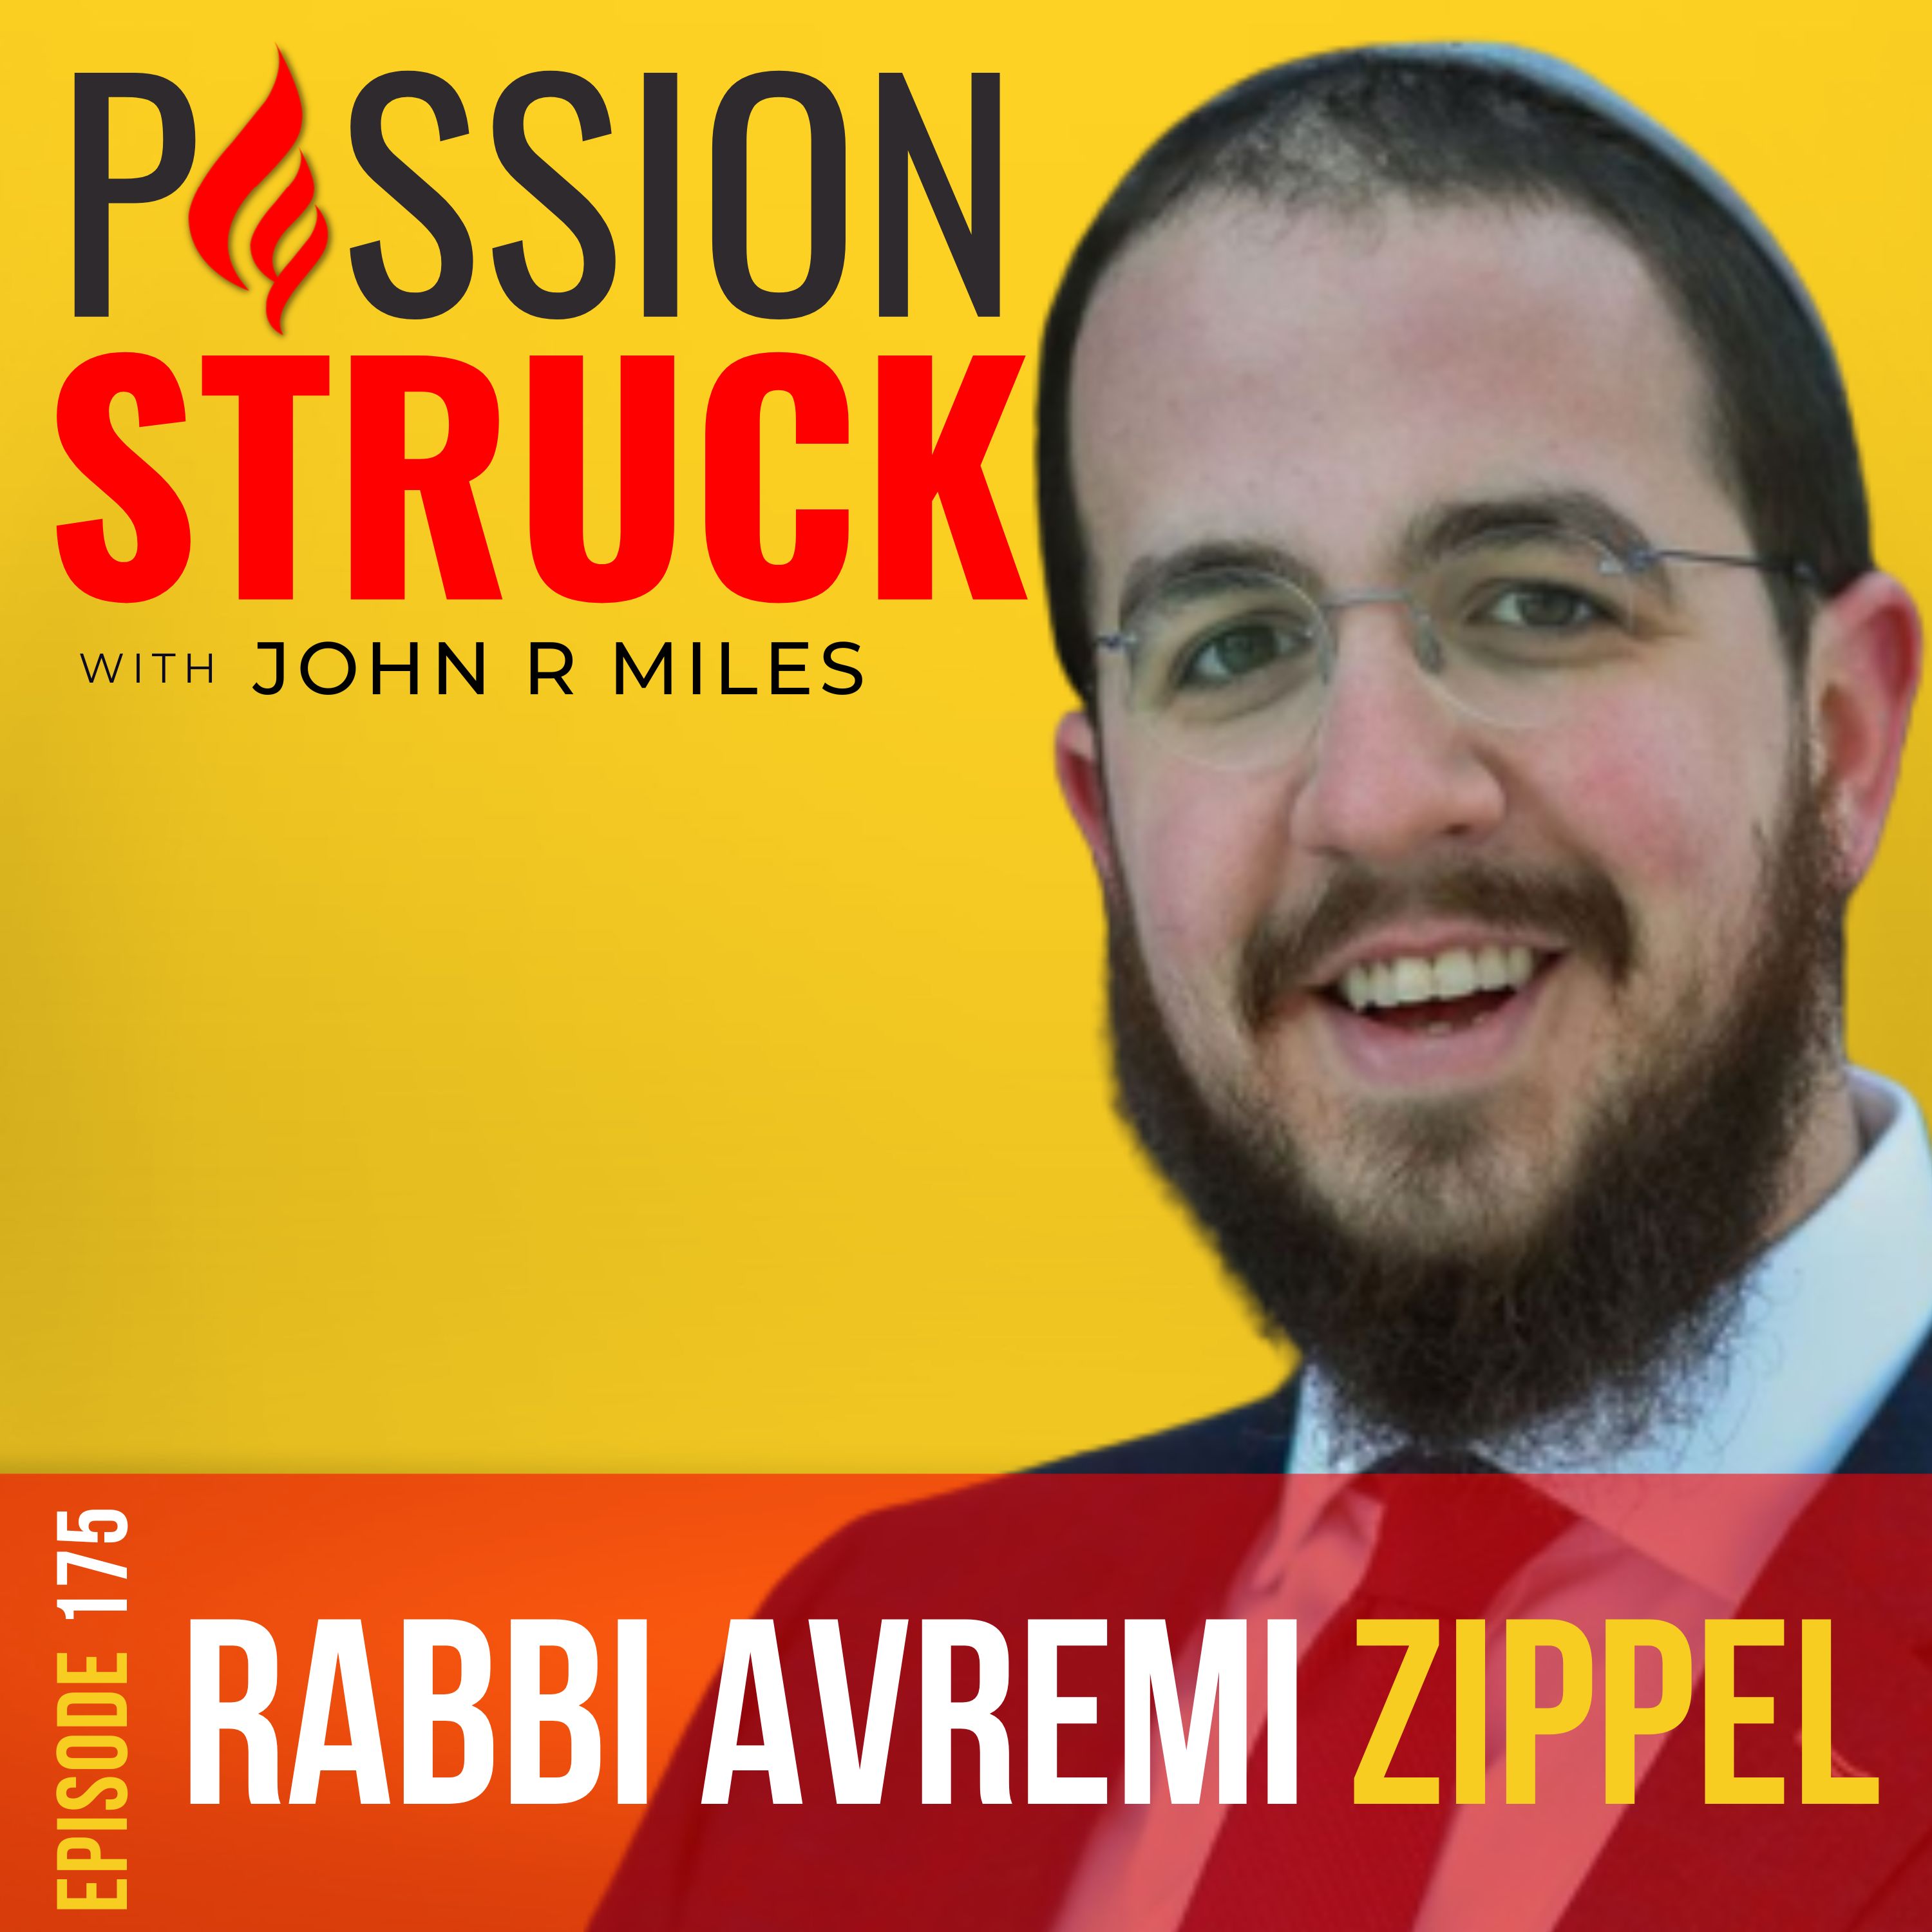 Passion Struck with John R. Miles album cover for episode 175 with Rabbi Avremi Zippel